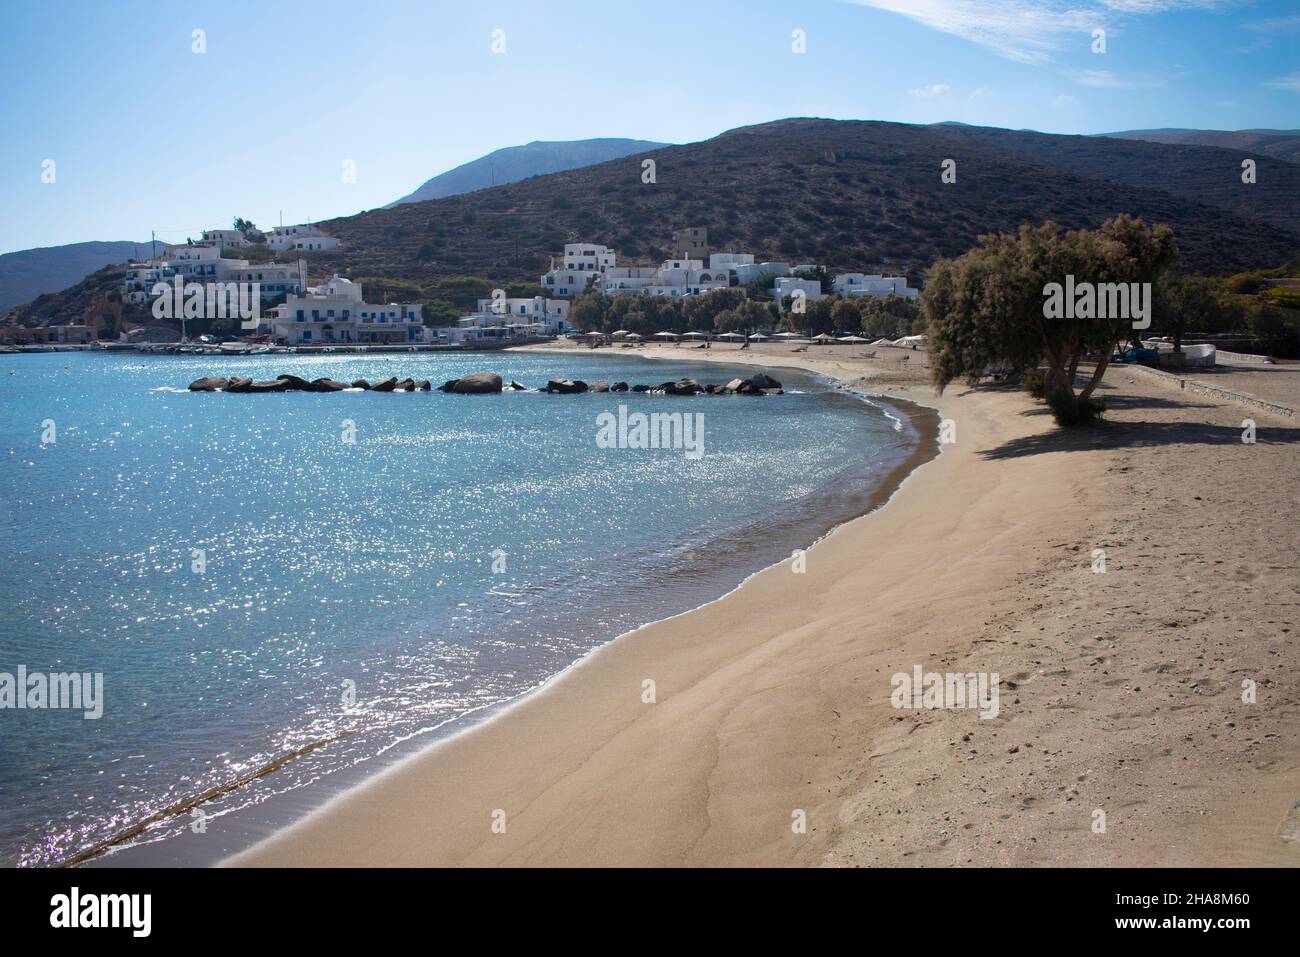 Beautiful Sikinos island, Greece. Seaside scene with a quiet sandy beach.  Charming, secluded holiday destination.  Landscape aspect view. Stock Photo